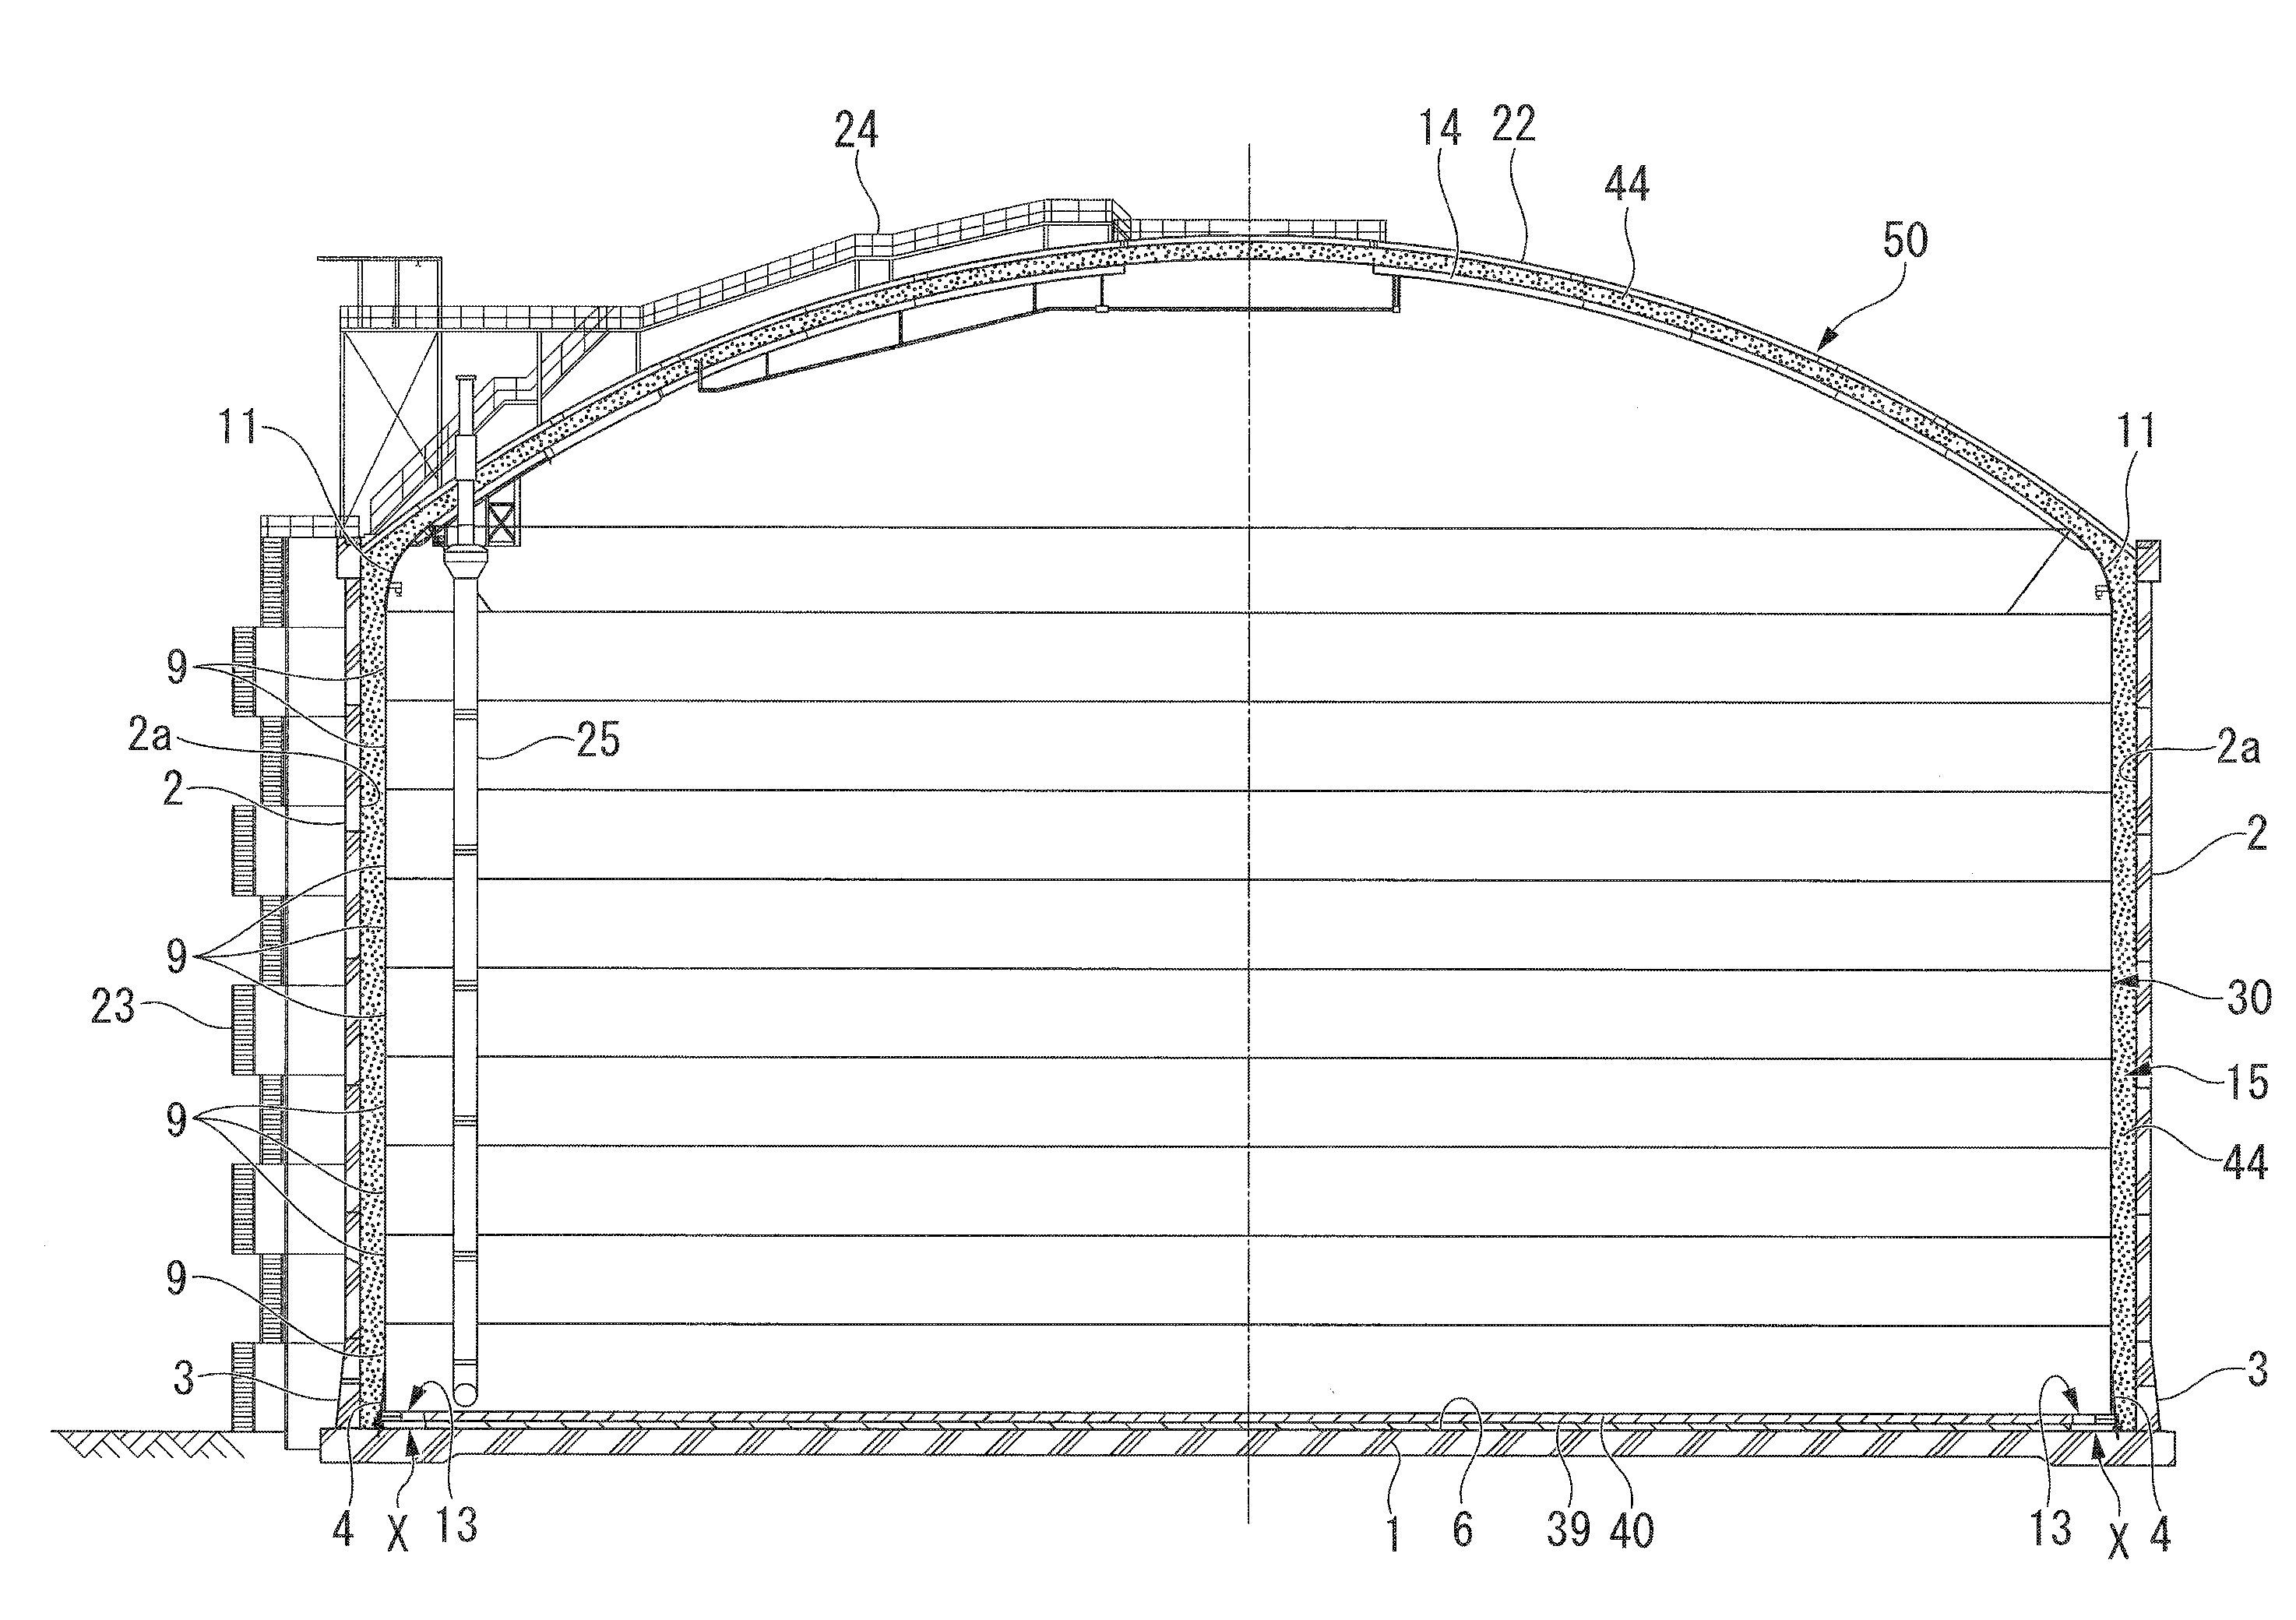 Method for constructing cylindrical tank